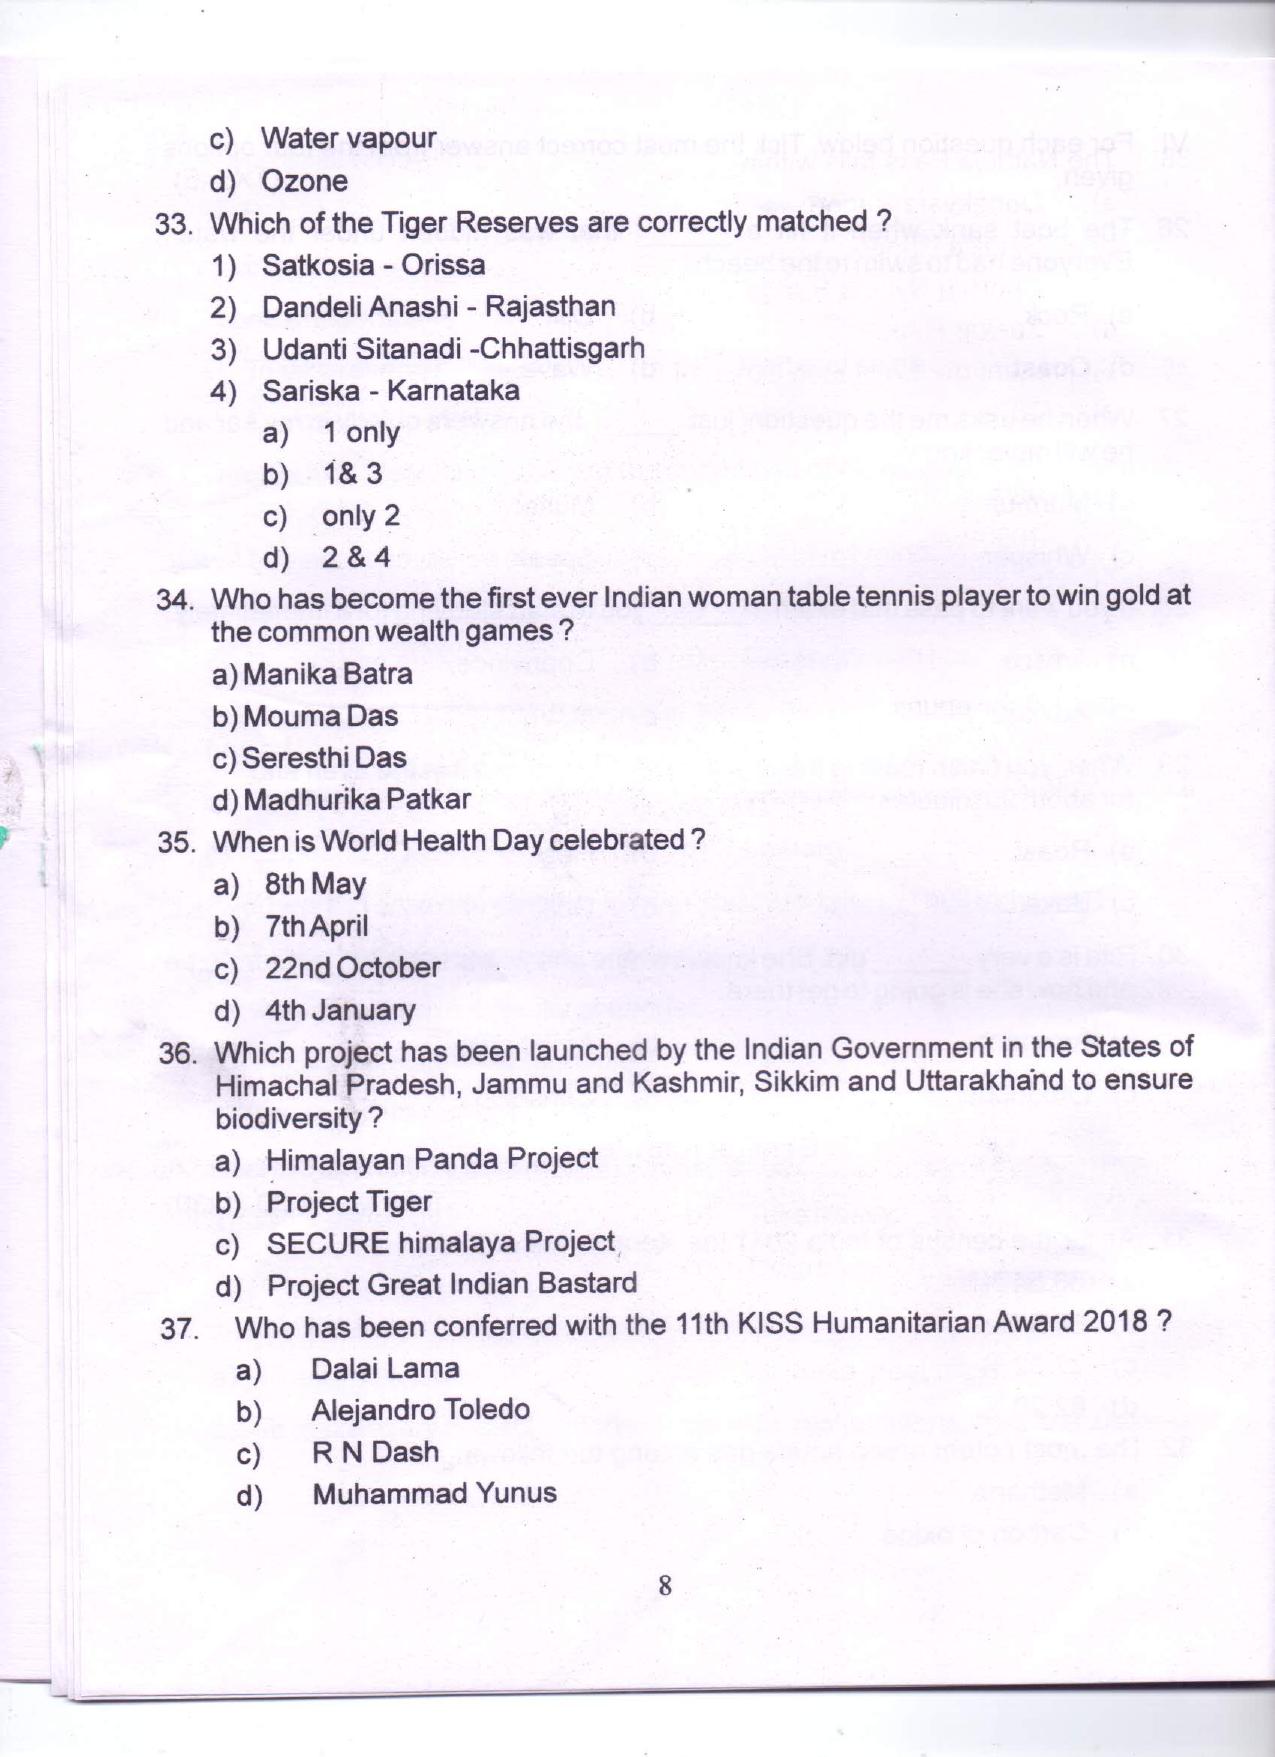 PDF Download Of SPSC MPHW General English & General Knowledge Previous Papers - Page 7